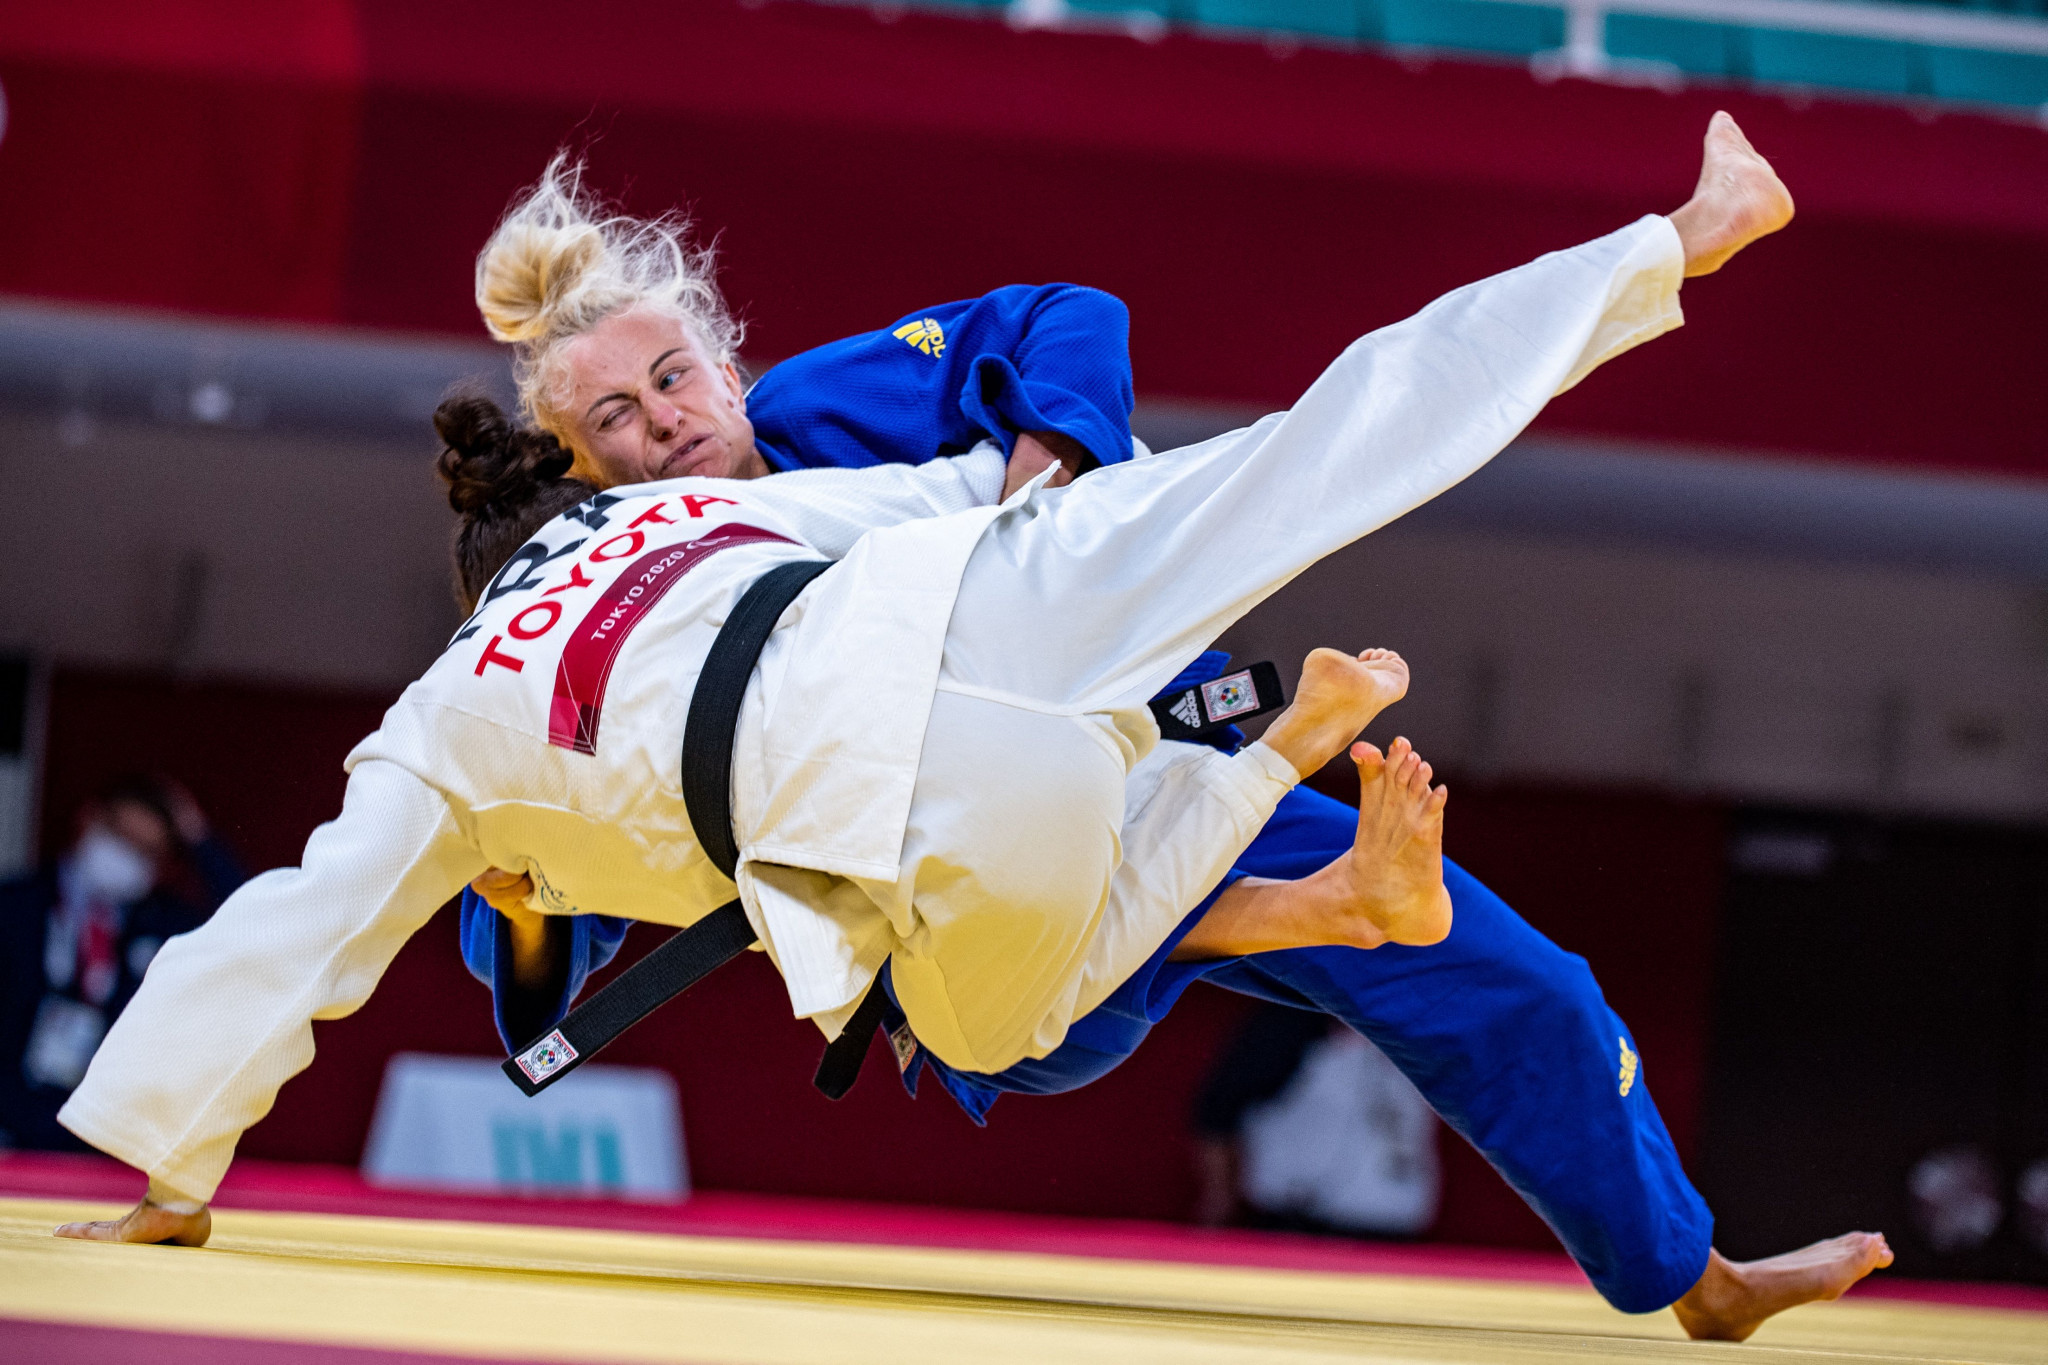 Twenty nations are expected to be represented at the 2022 IBSA European Judo Championships ©Getty Images